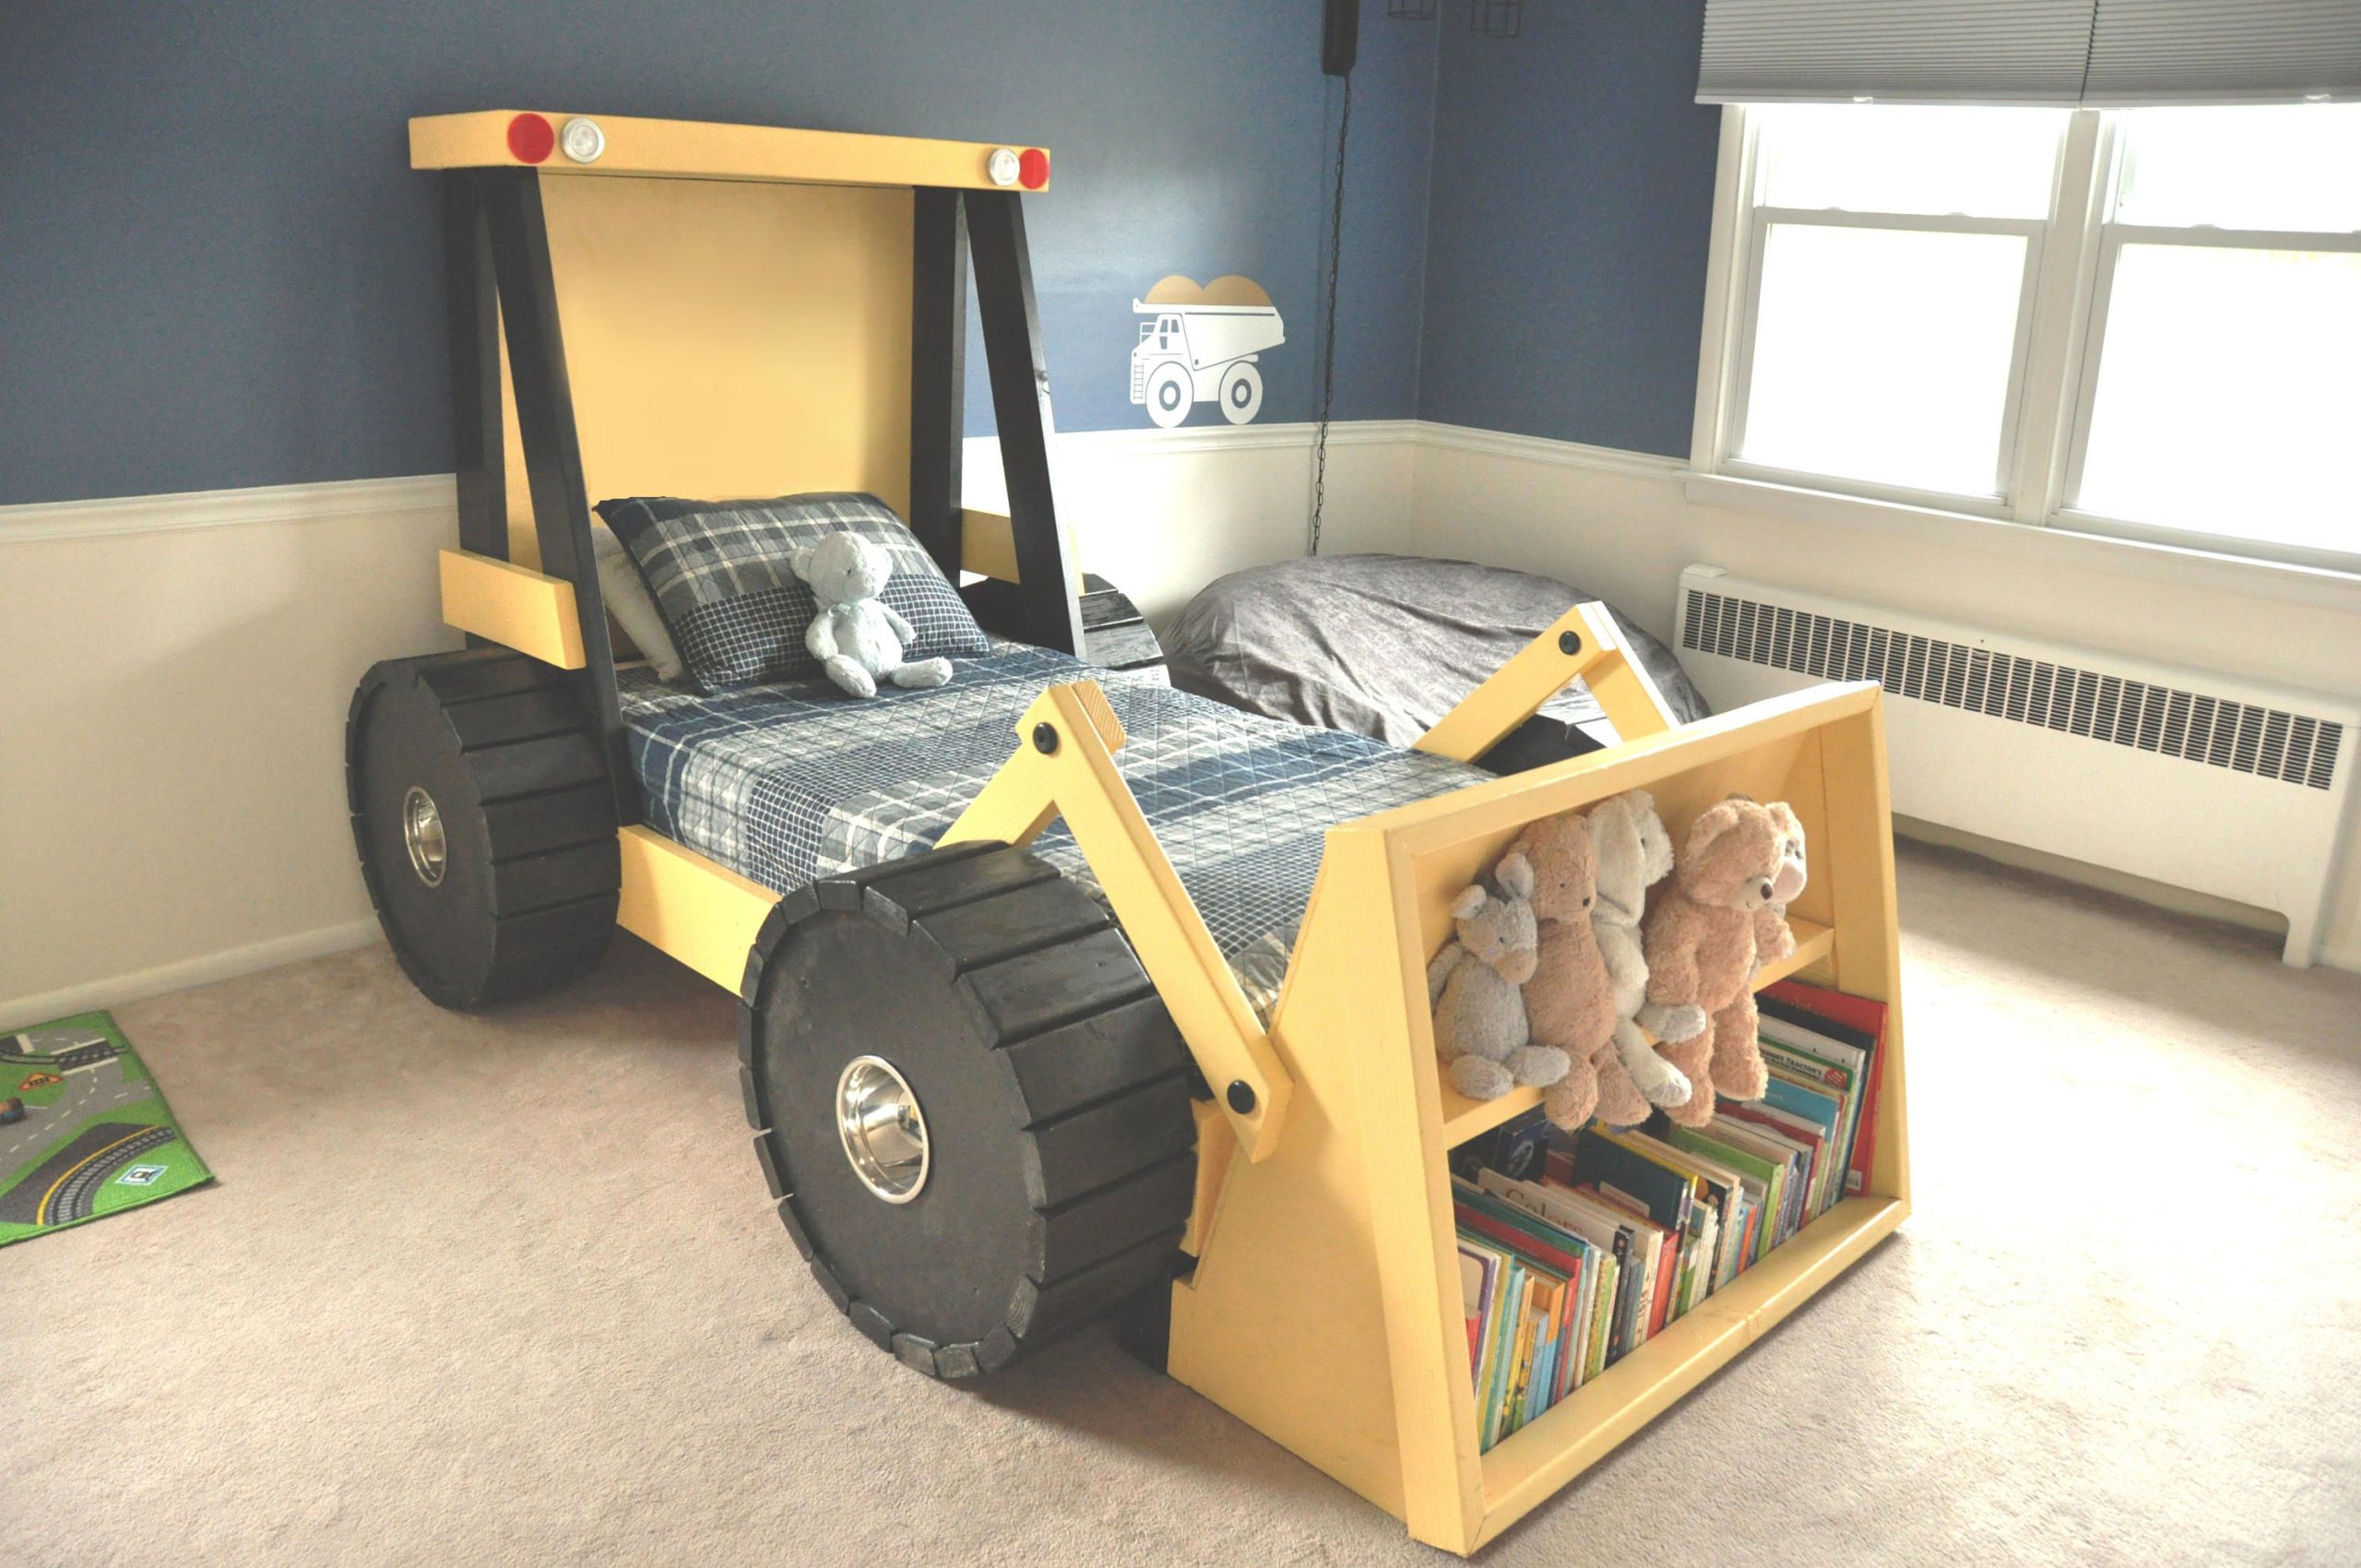 cool beds for boys